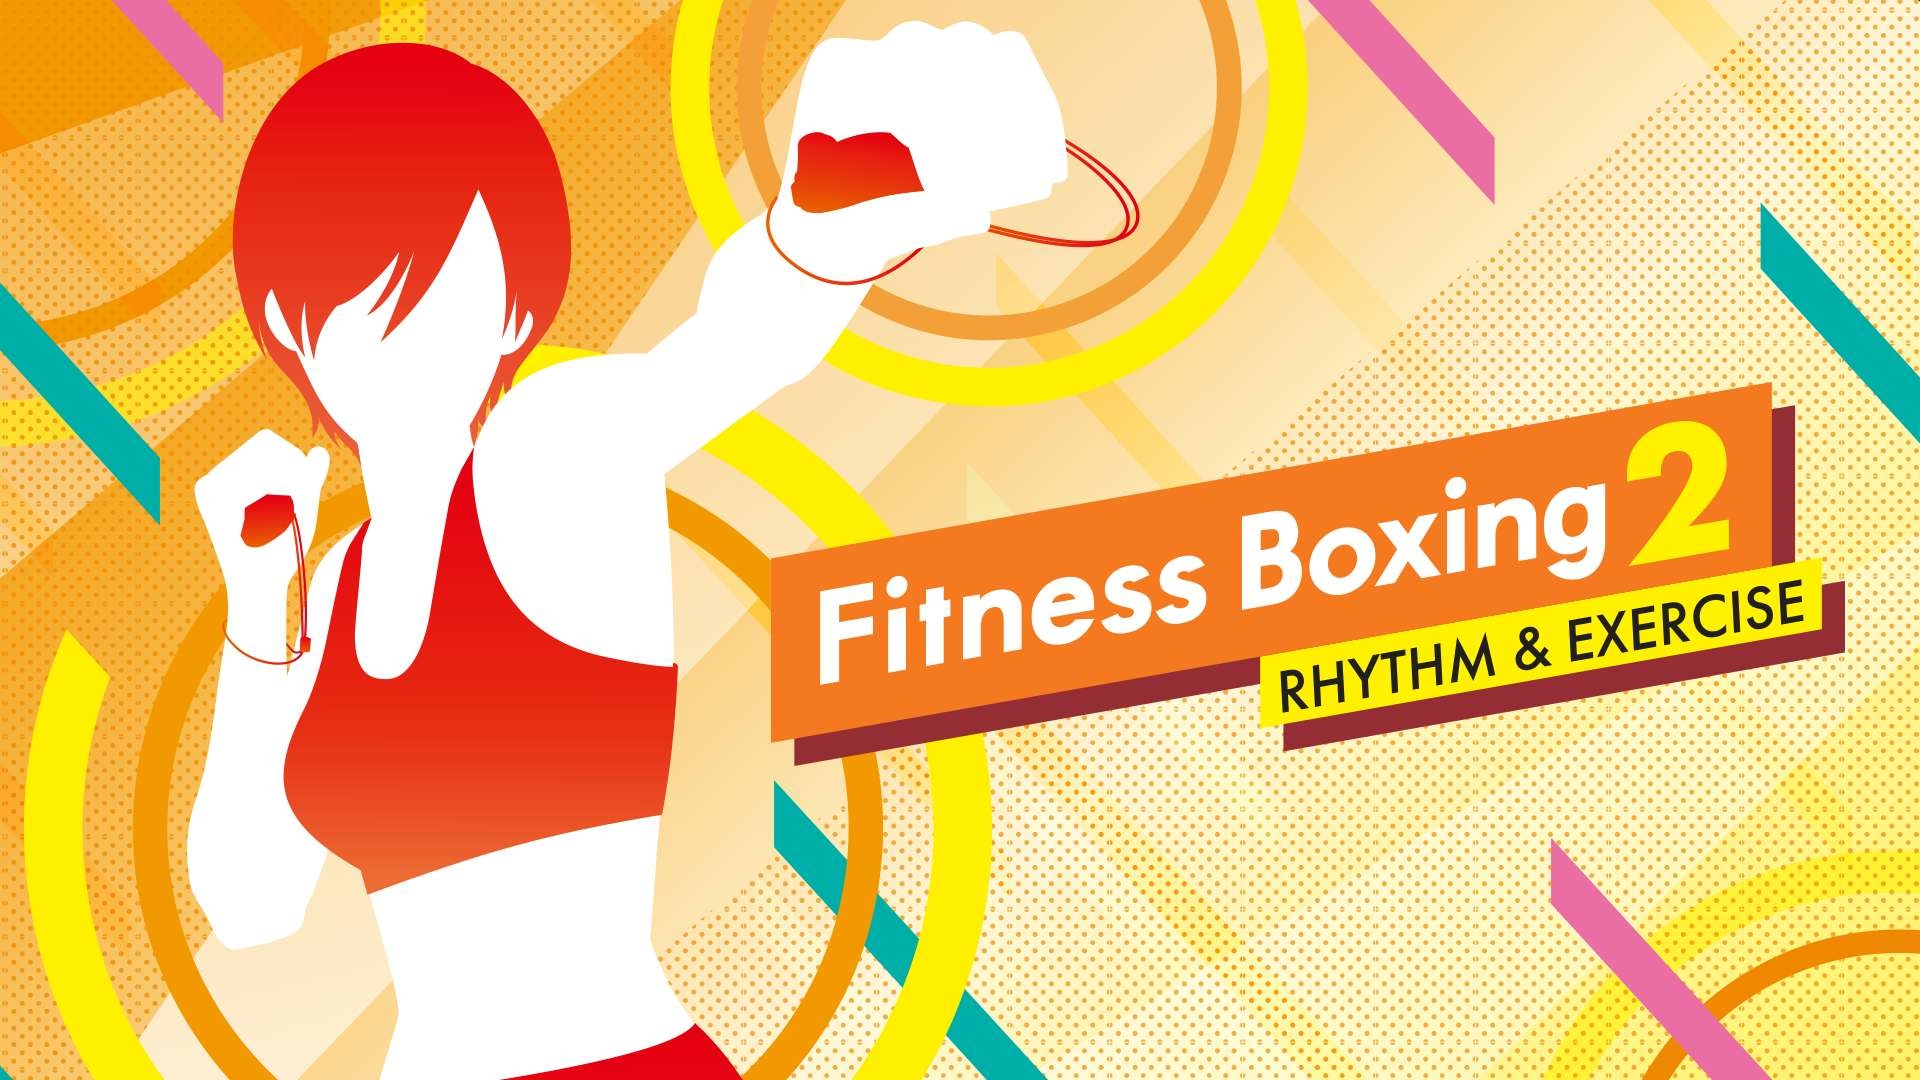 Fitness Boxing 2: Rhythm And Exercise Announced For Nintendo Switch This Winter